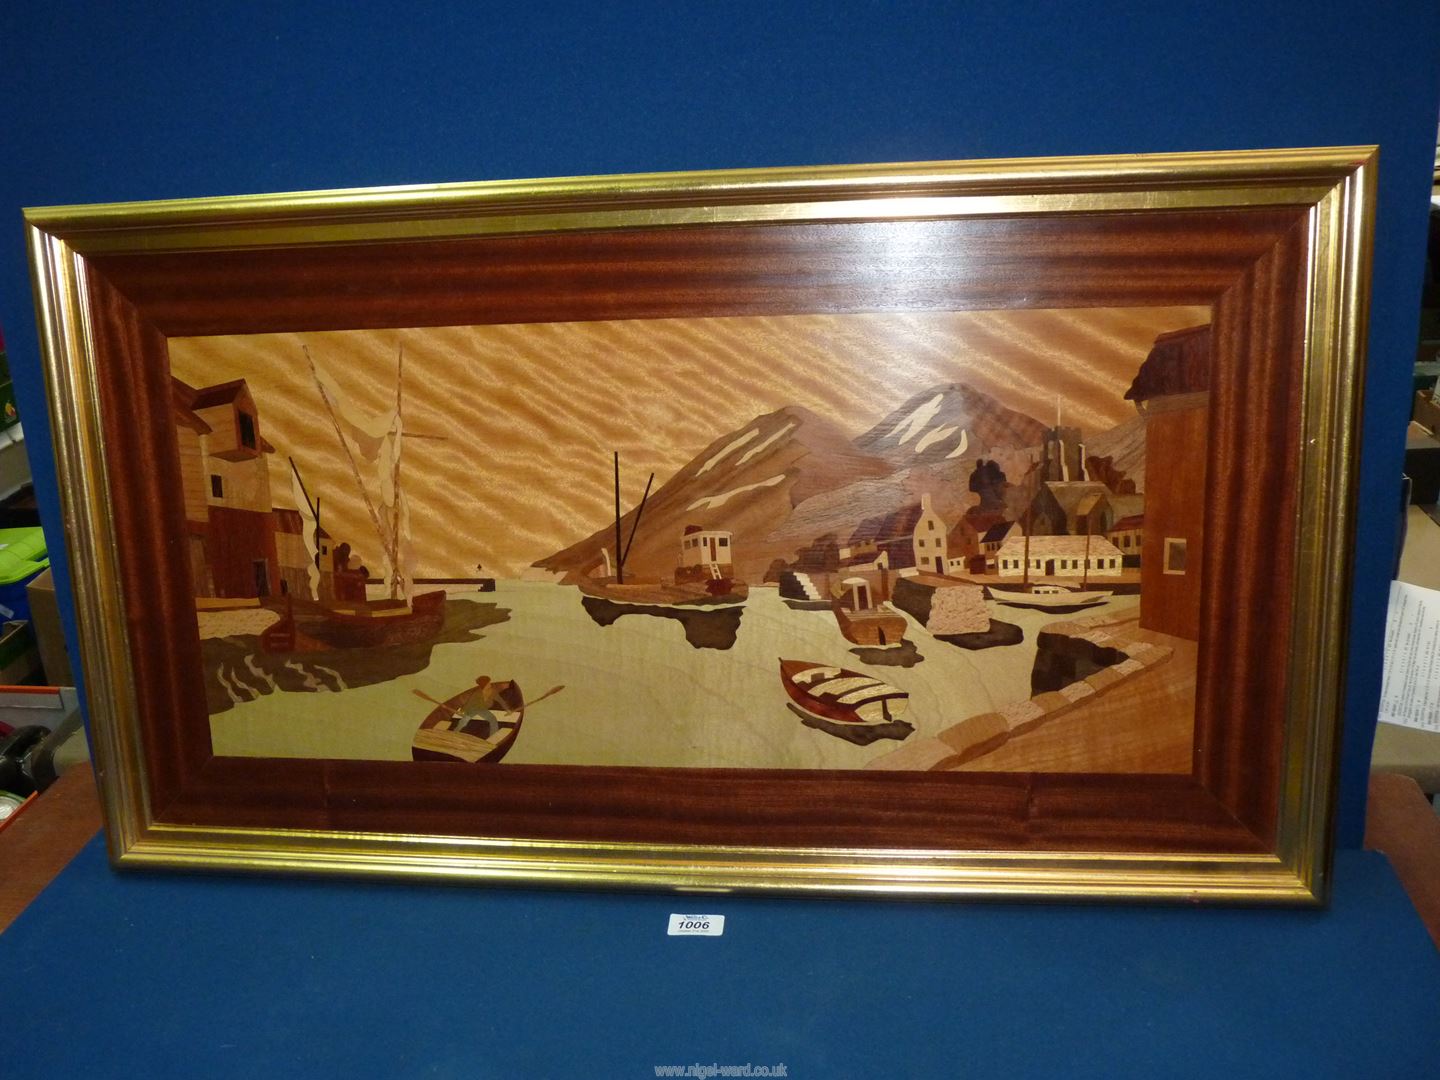 A large handcrafted Marquetry plaque of Harbour scene, frame size 35" x 19 1/2".